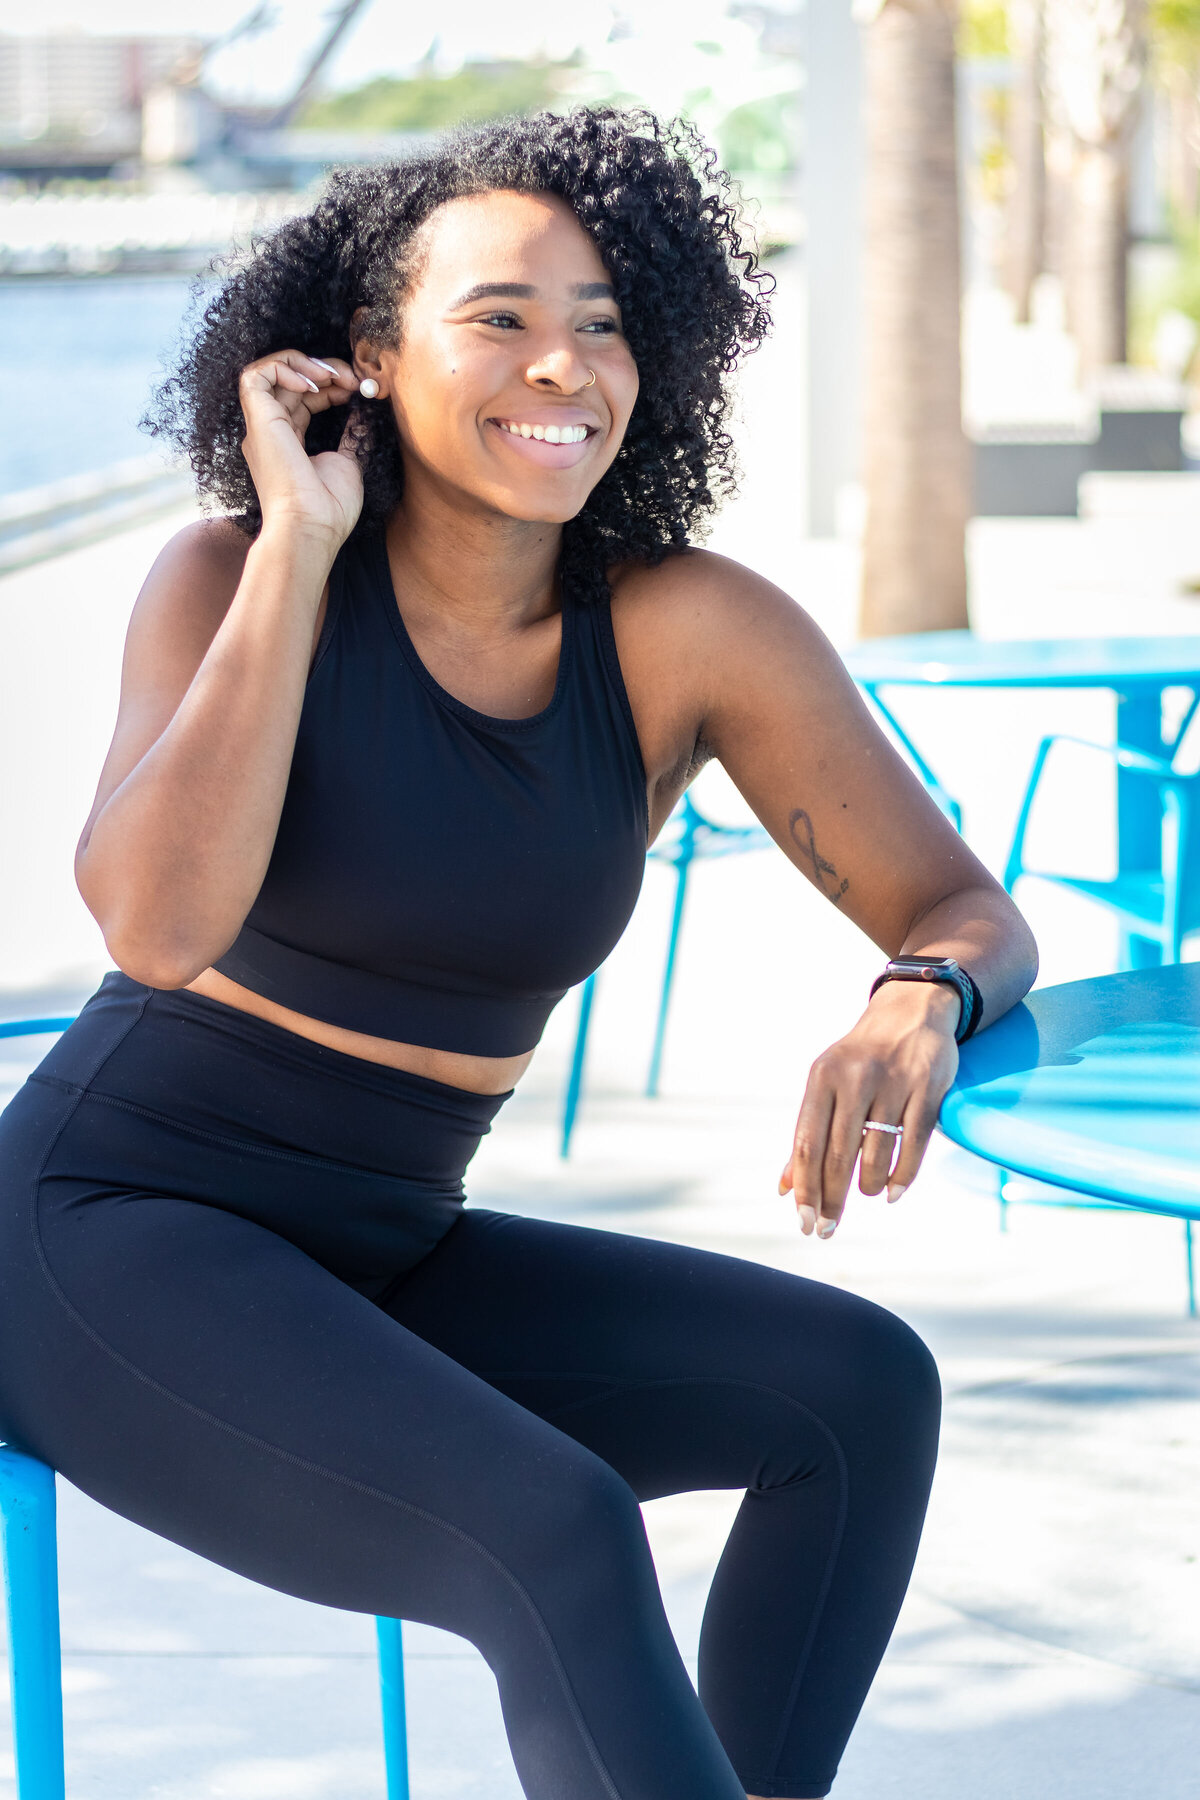 magaly_tampa_austin_fitness_fabletics_wellness_branding_brand_photography-05